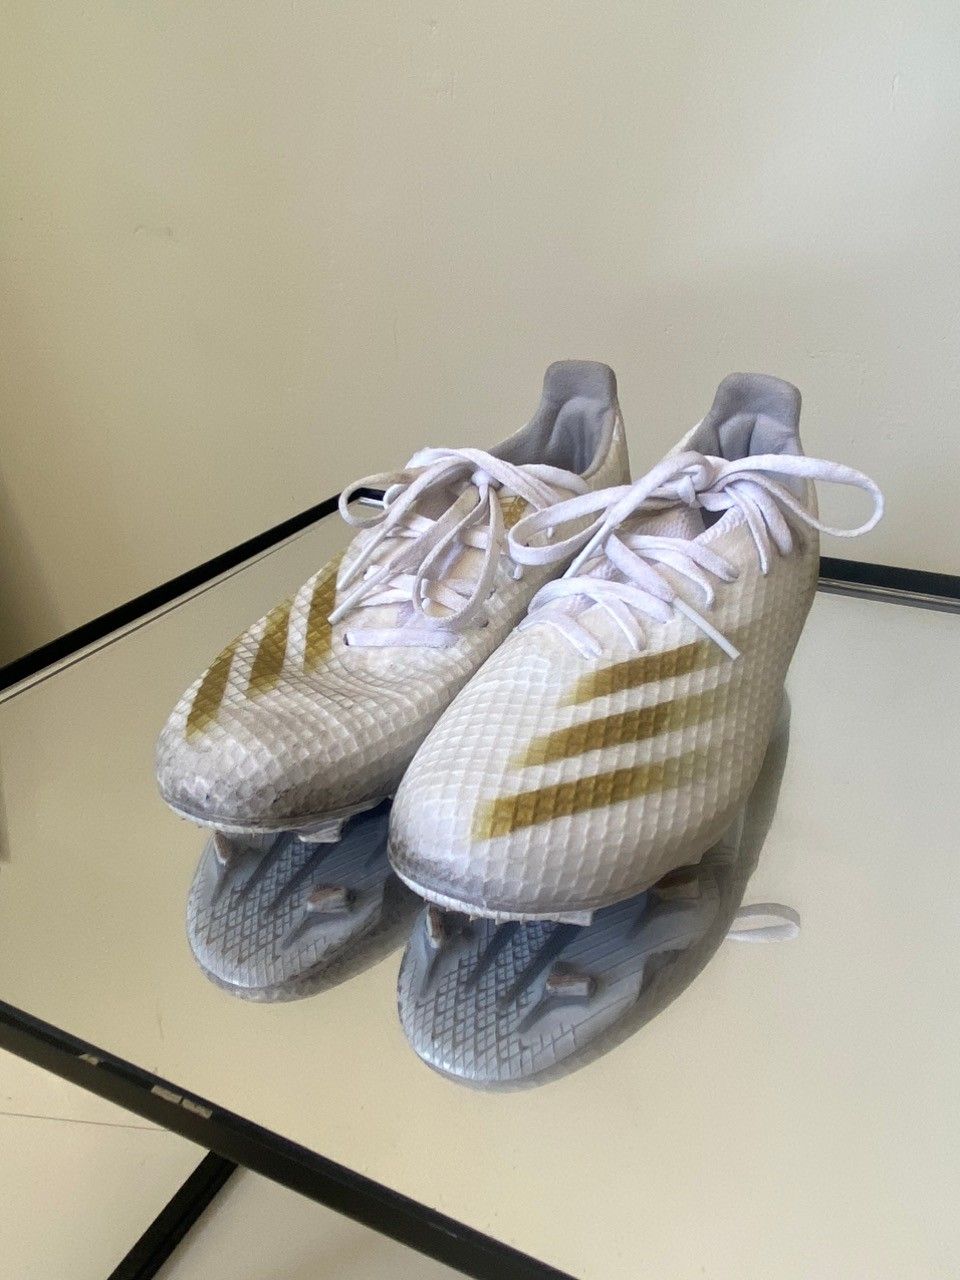 Adidas X Ghosted.3 jalkapallokengät